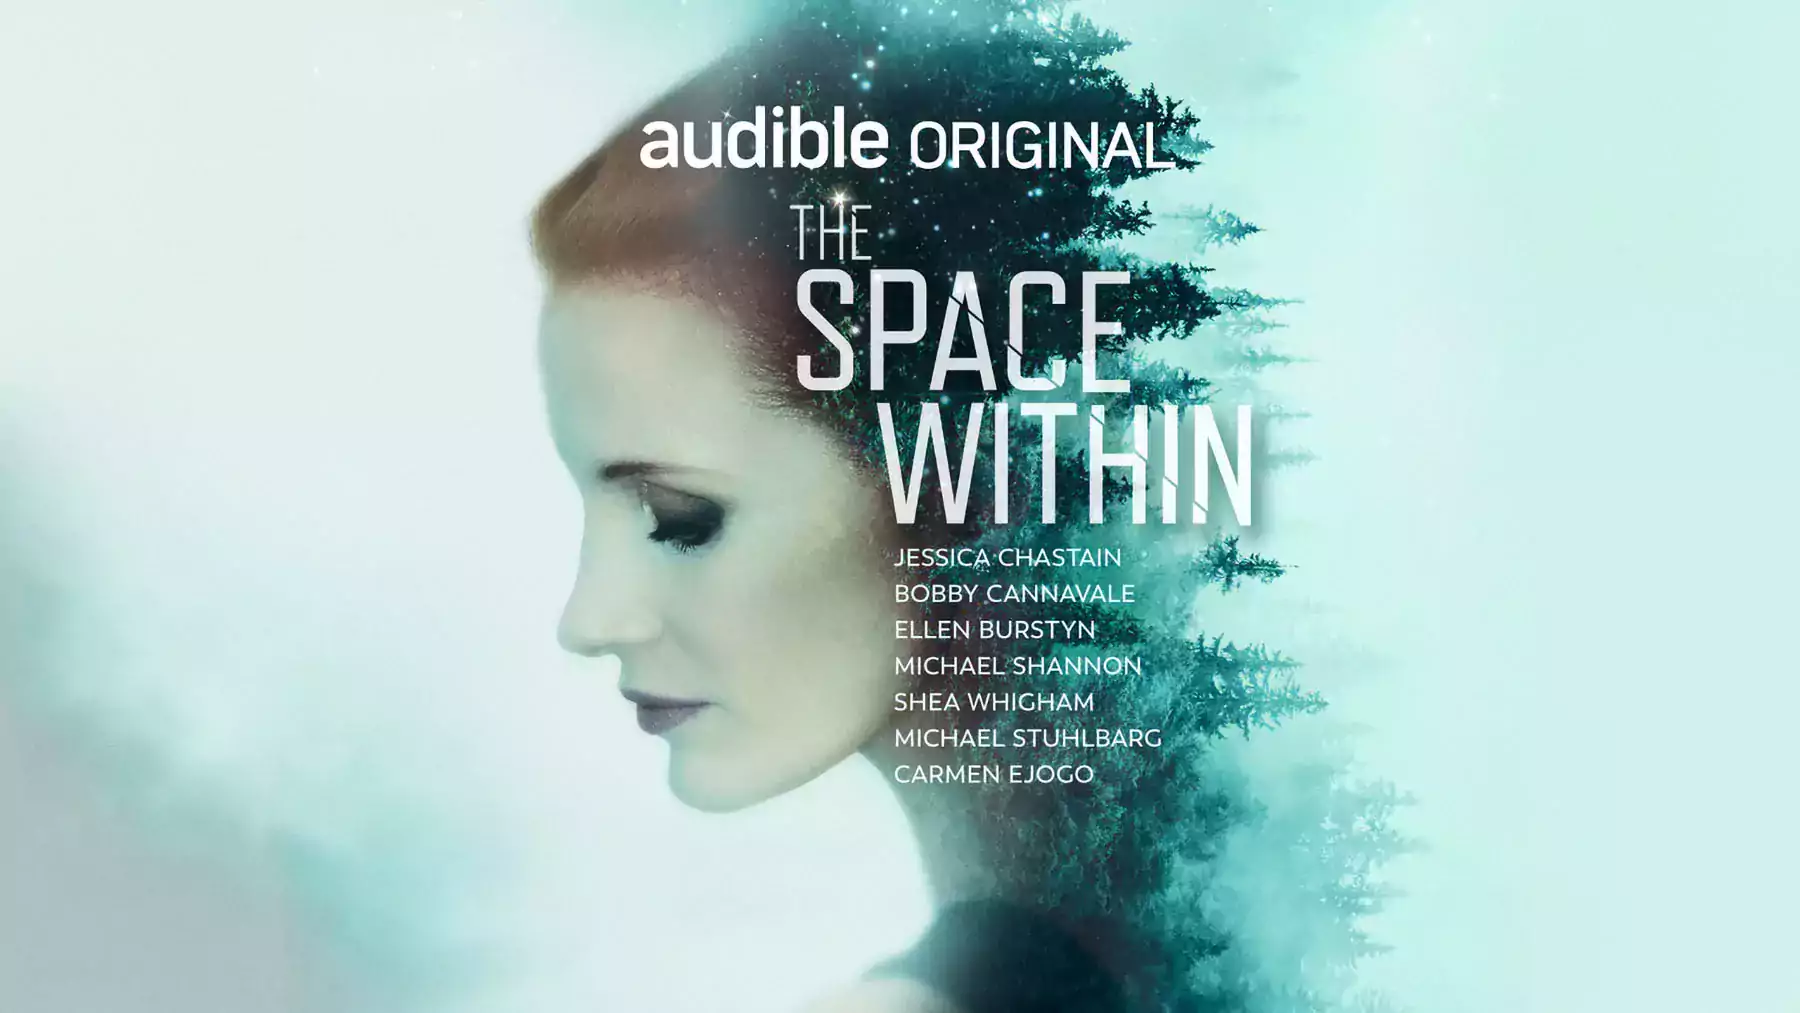 The space within by Jessica Chastain